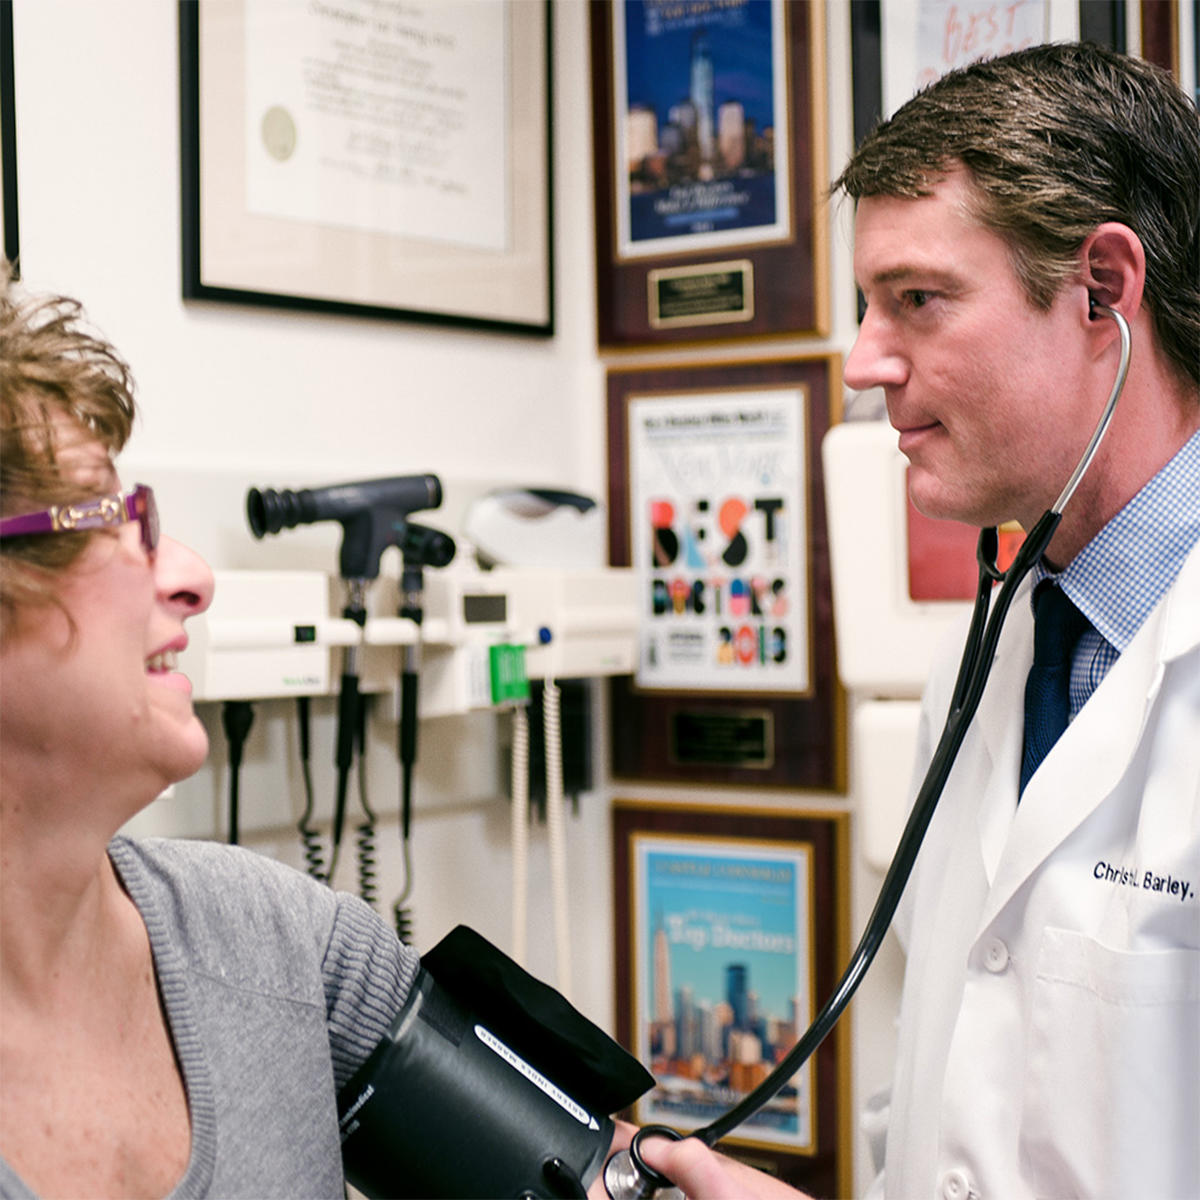 Dr. Barley can diagnose a variety of conditions, including common illnesses, cardiovascular conditions, cancer, & other diseases. He is also able to perform physical exams & make house calls for patients who are unable to travel to our New York office. It is this type of care & dedication that separates Dr. Barley from other physicians in NYC.